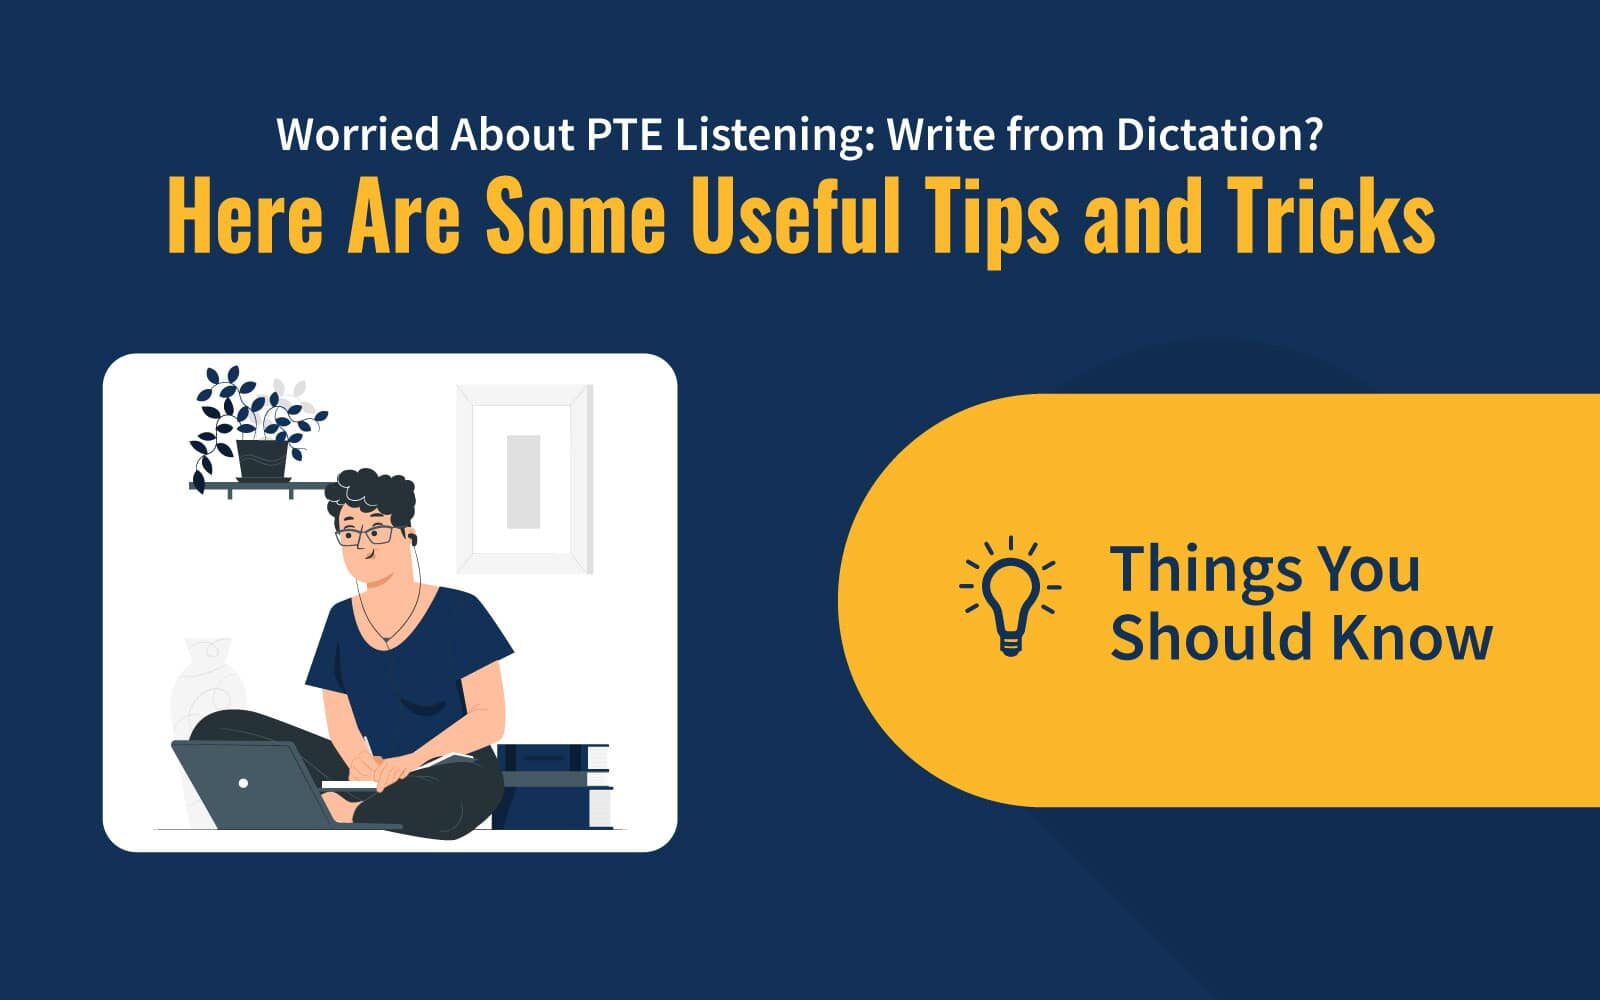 Worried About PTE Listening: Write from Dictation? Here Are Some Useful Tips and Tricks